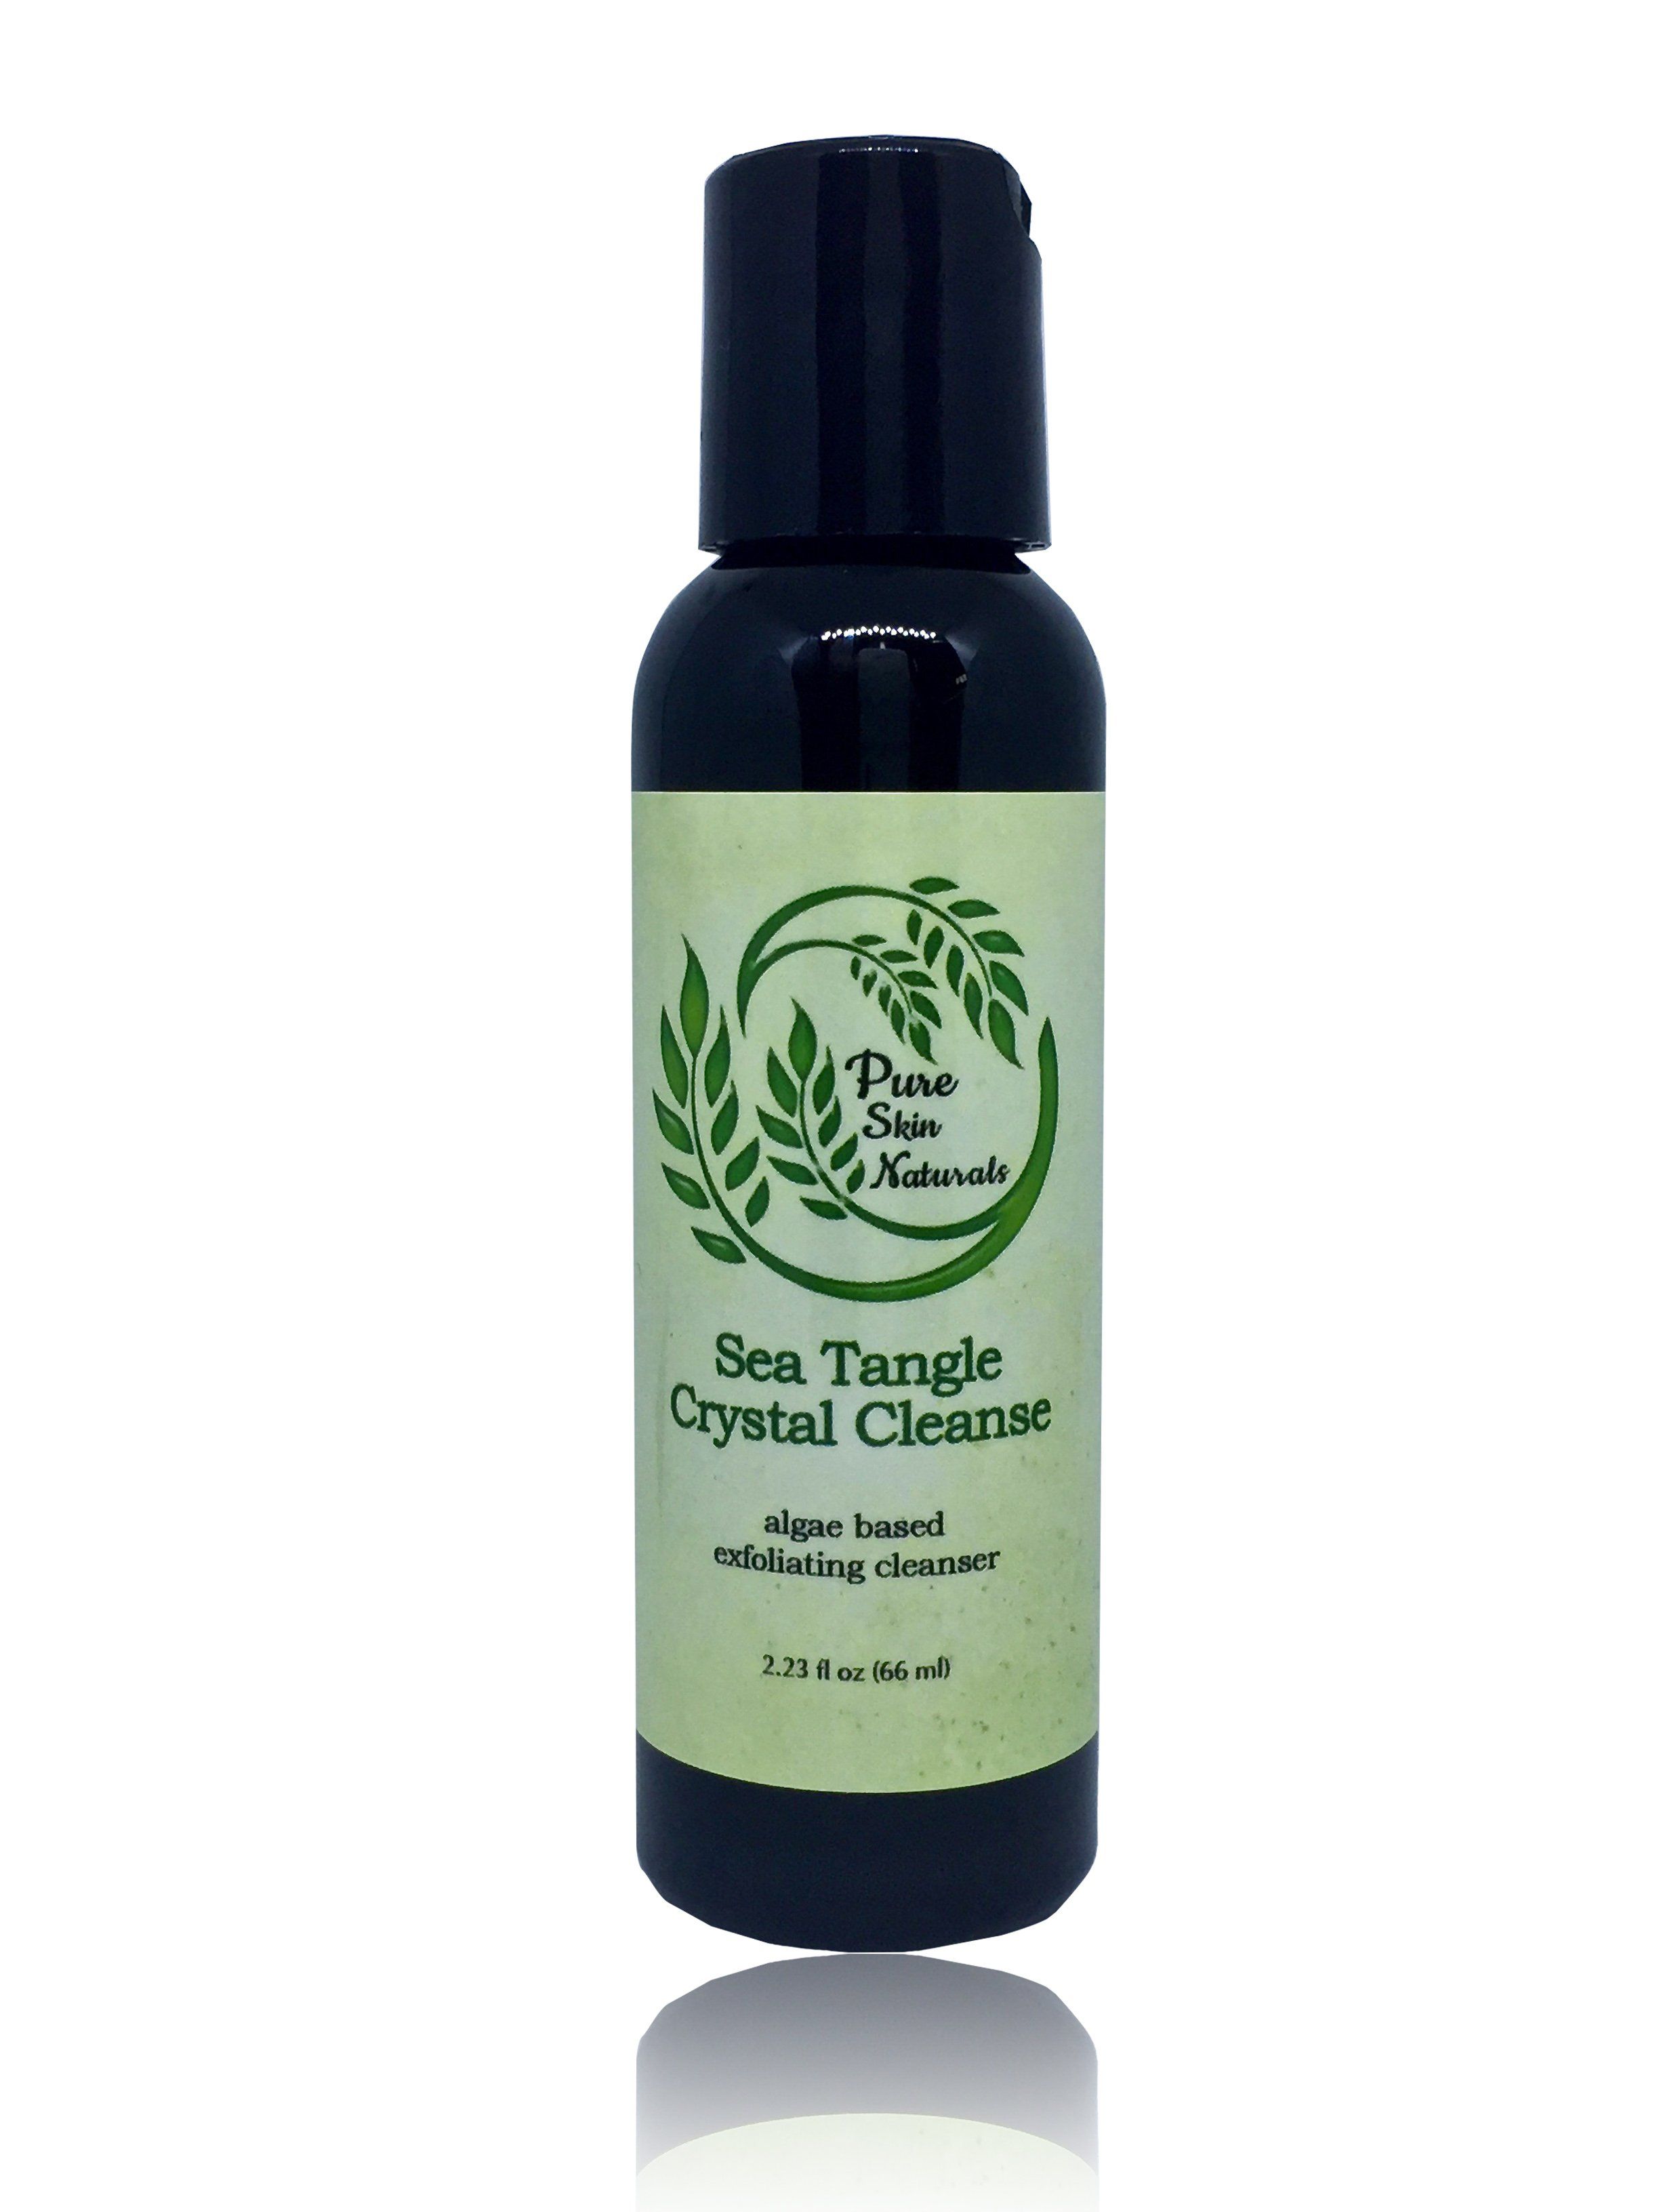 Sea Tangle Crystal Cleanse is an algae based micro-dermabrasion exfoliating cleanser